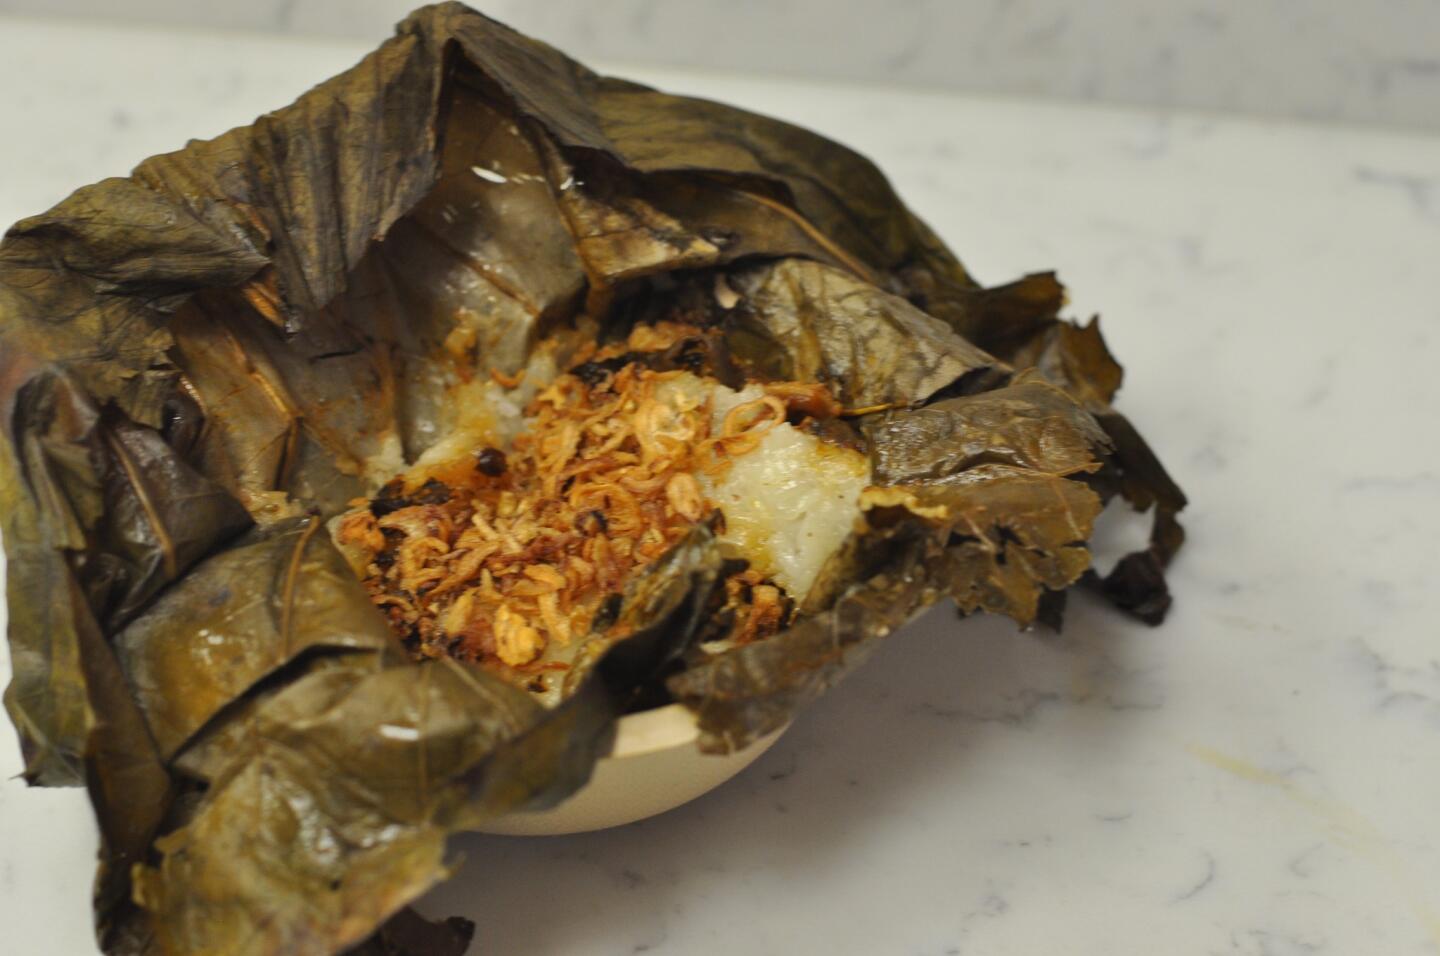 Mushroom Lo Mai Gai, sticky rice with mushrooms, black beans and shallots cooked in a lotus leaf.